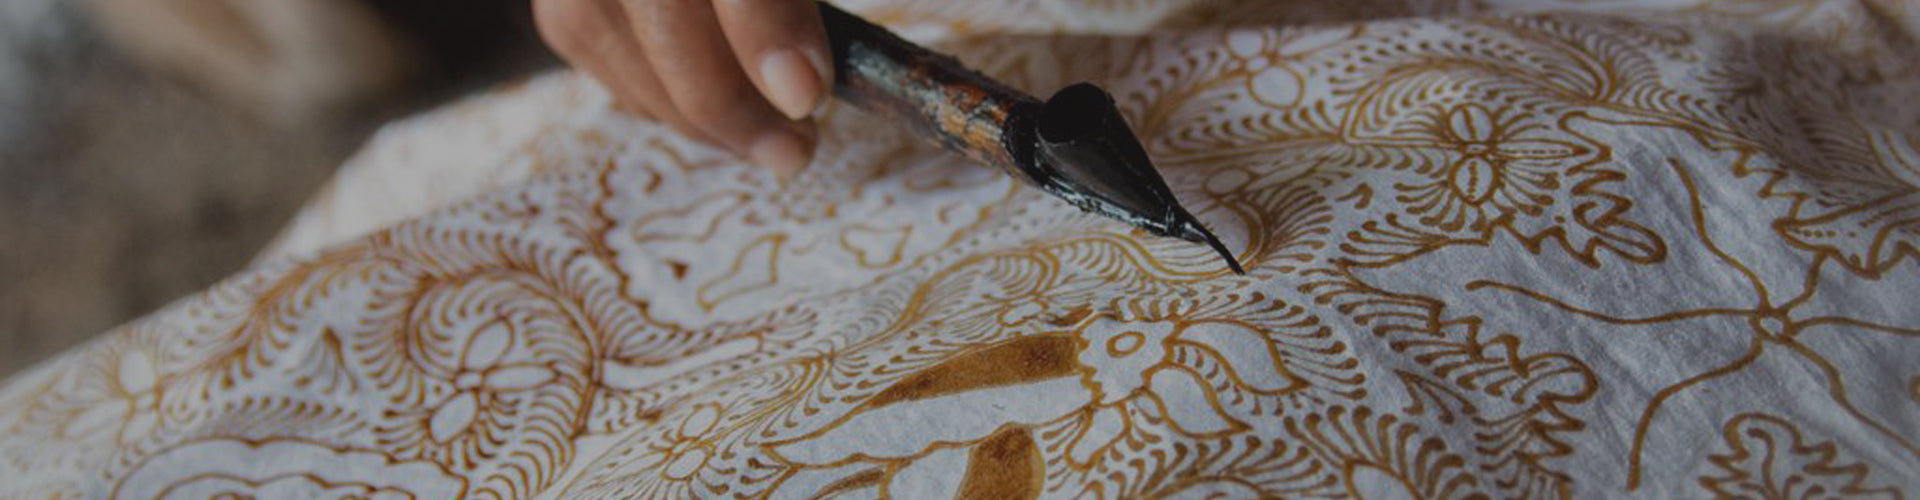       Batik is a traditional Indonesian method of fabric